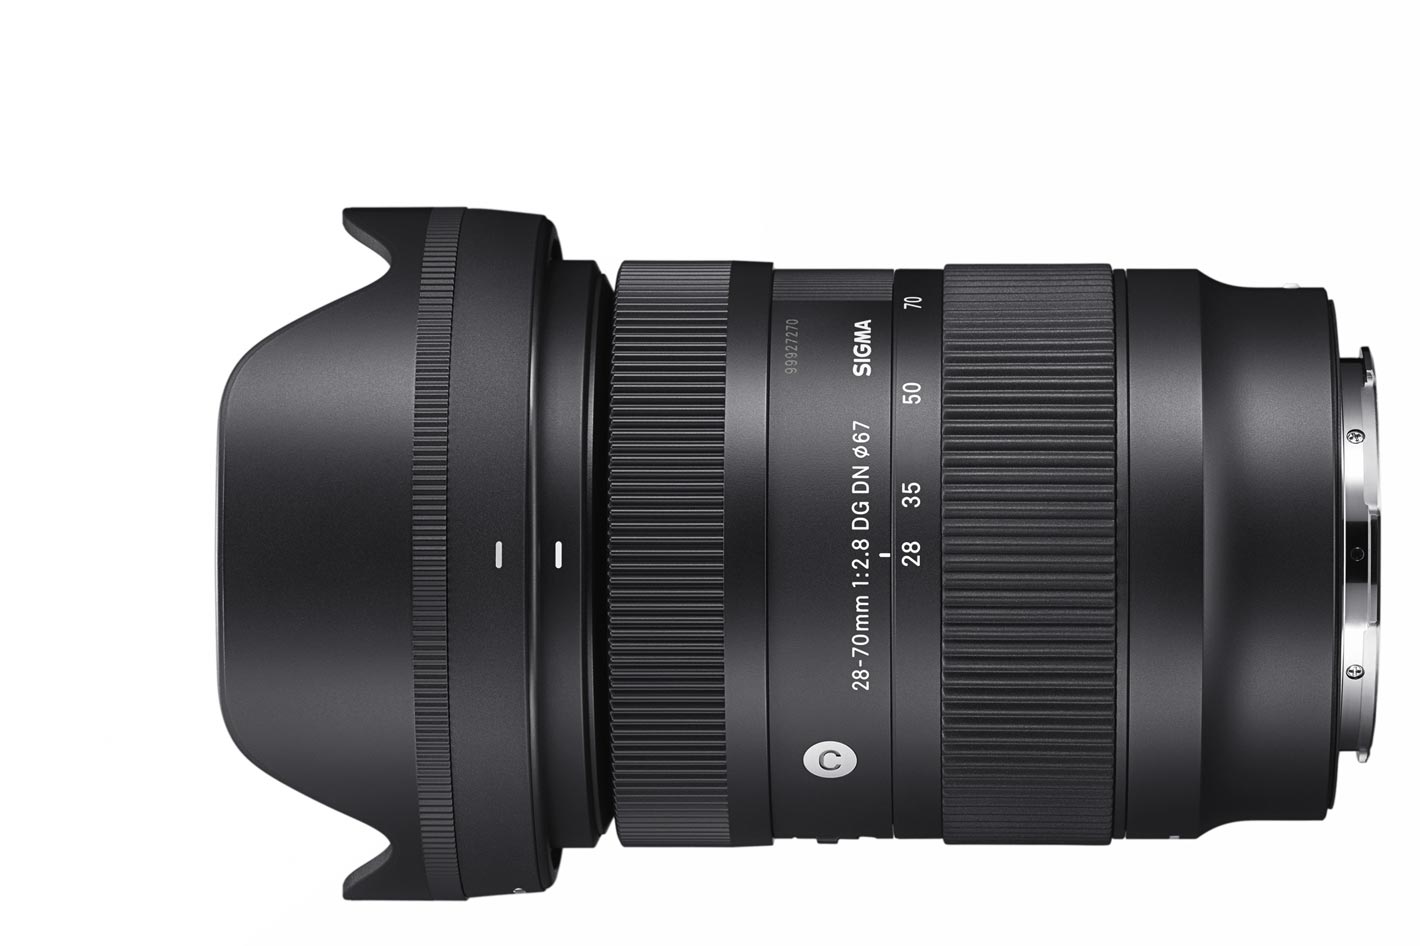 SIGMA 28-70mm F2.8 DG DN: redefining the standard zoom